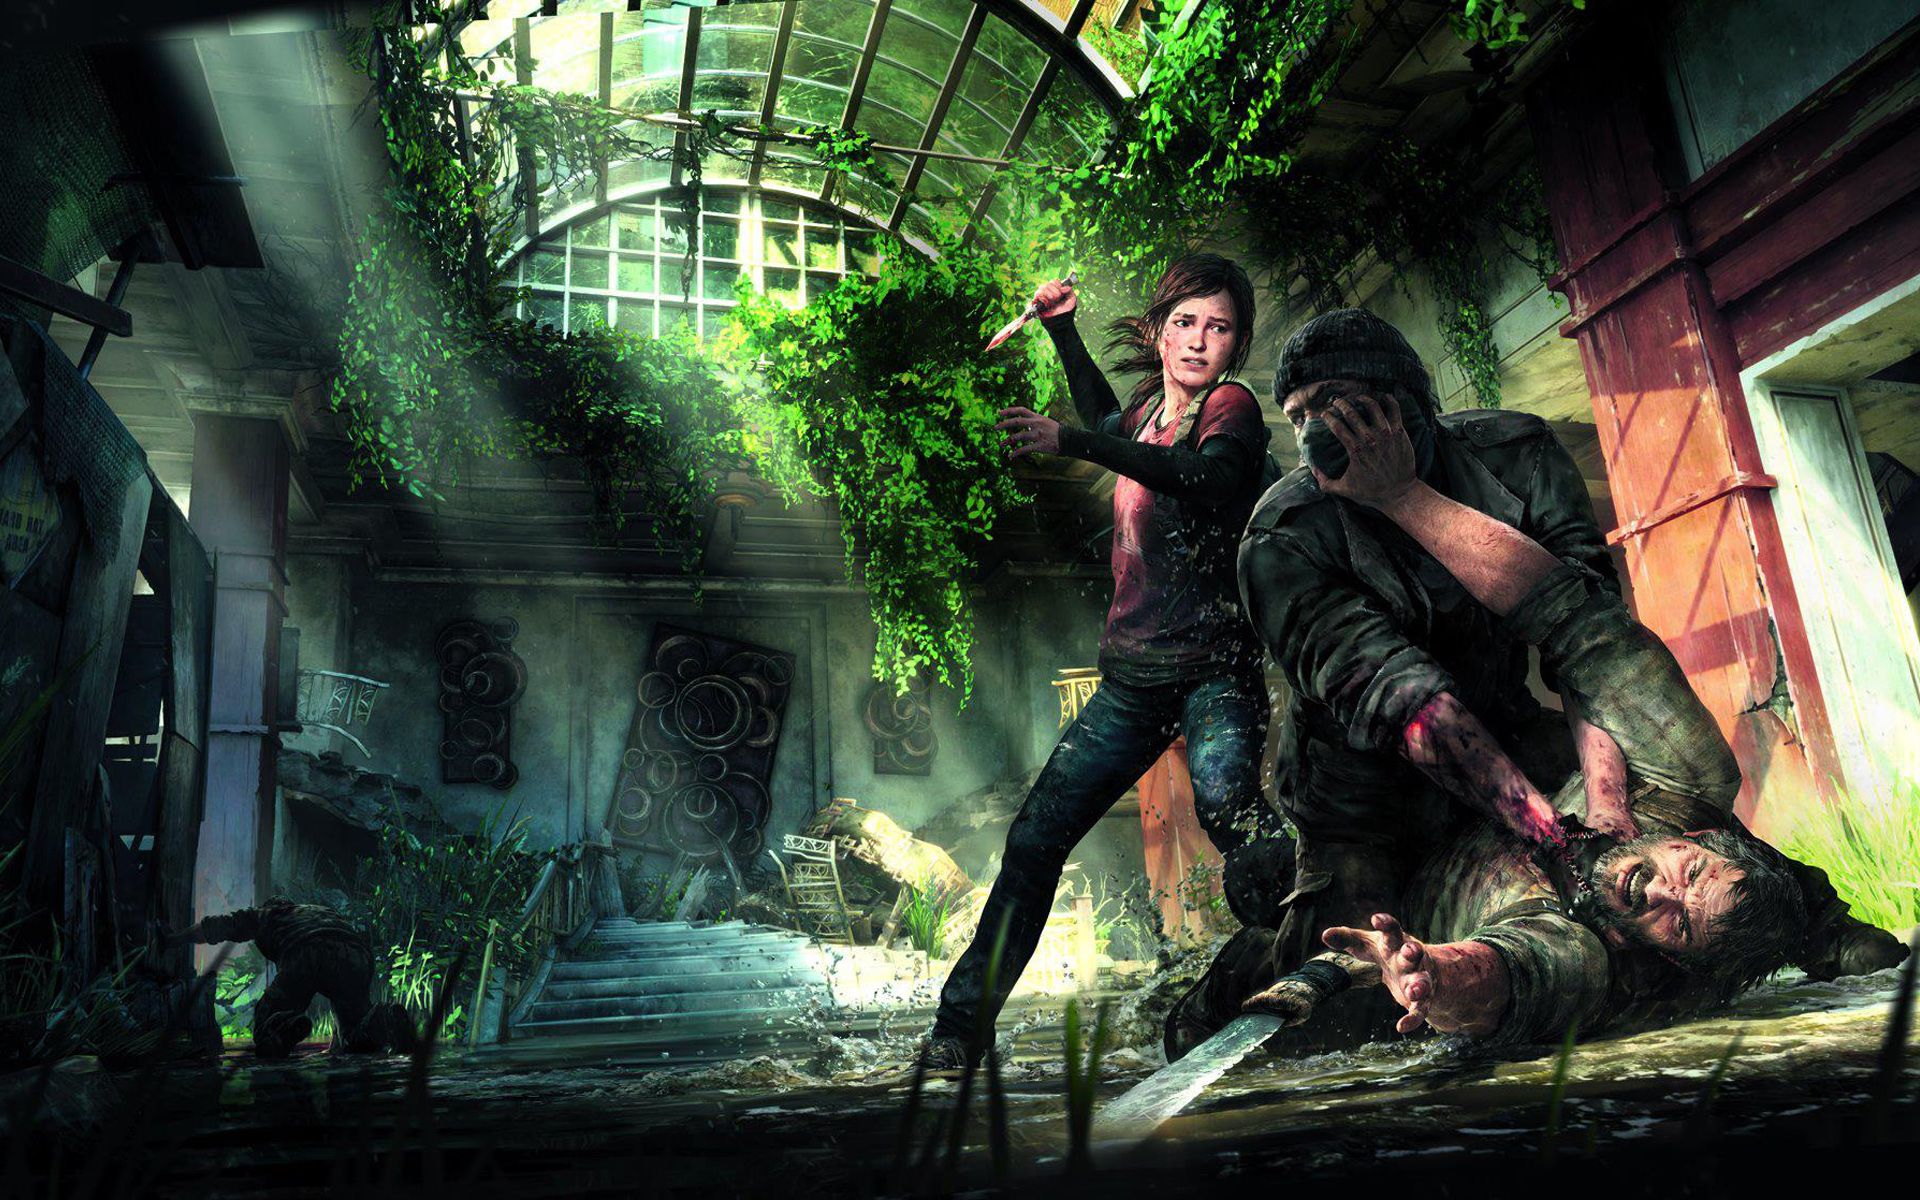 The Last Of Us wallpaper, Video Game, HQ The Last Of Us picture